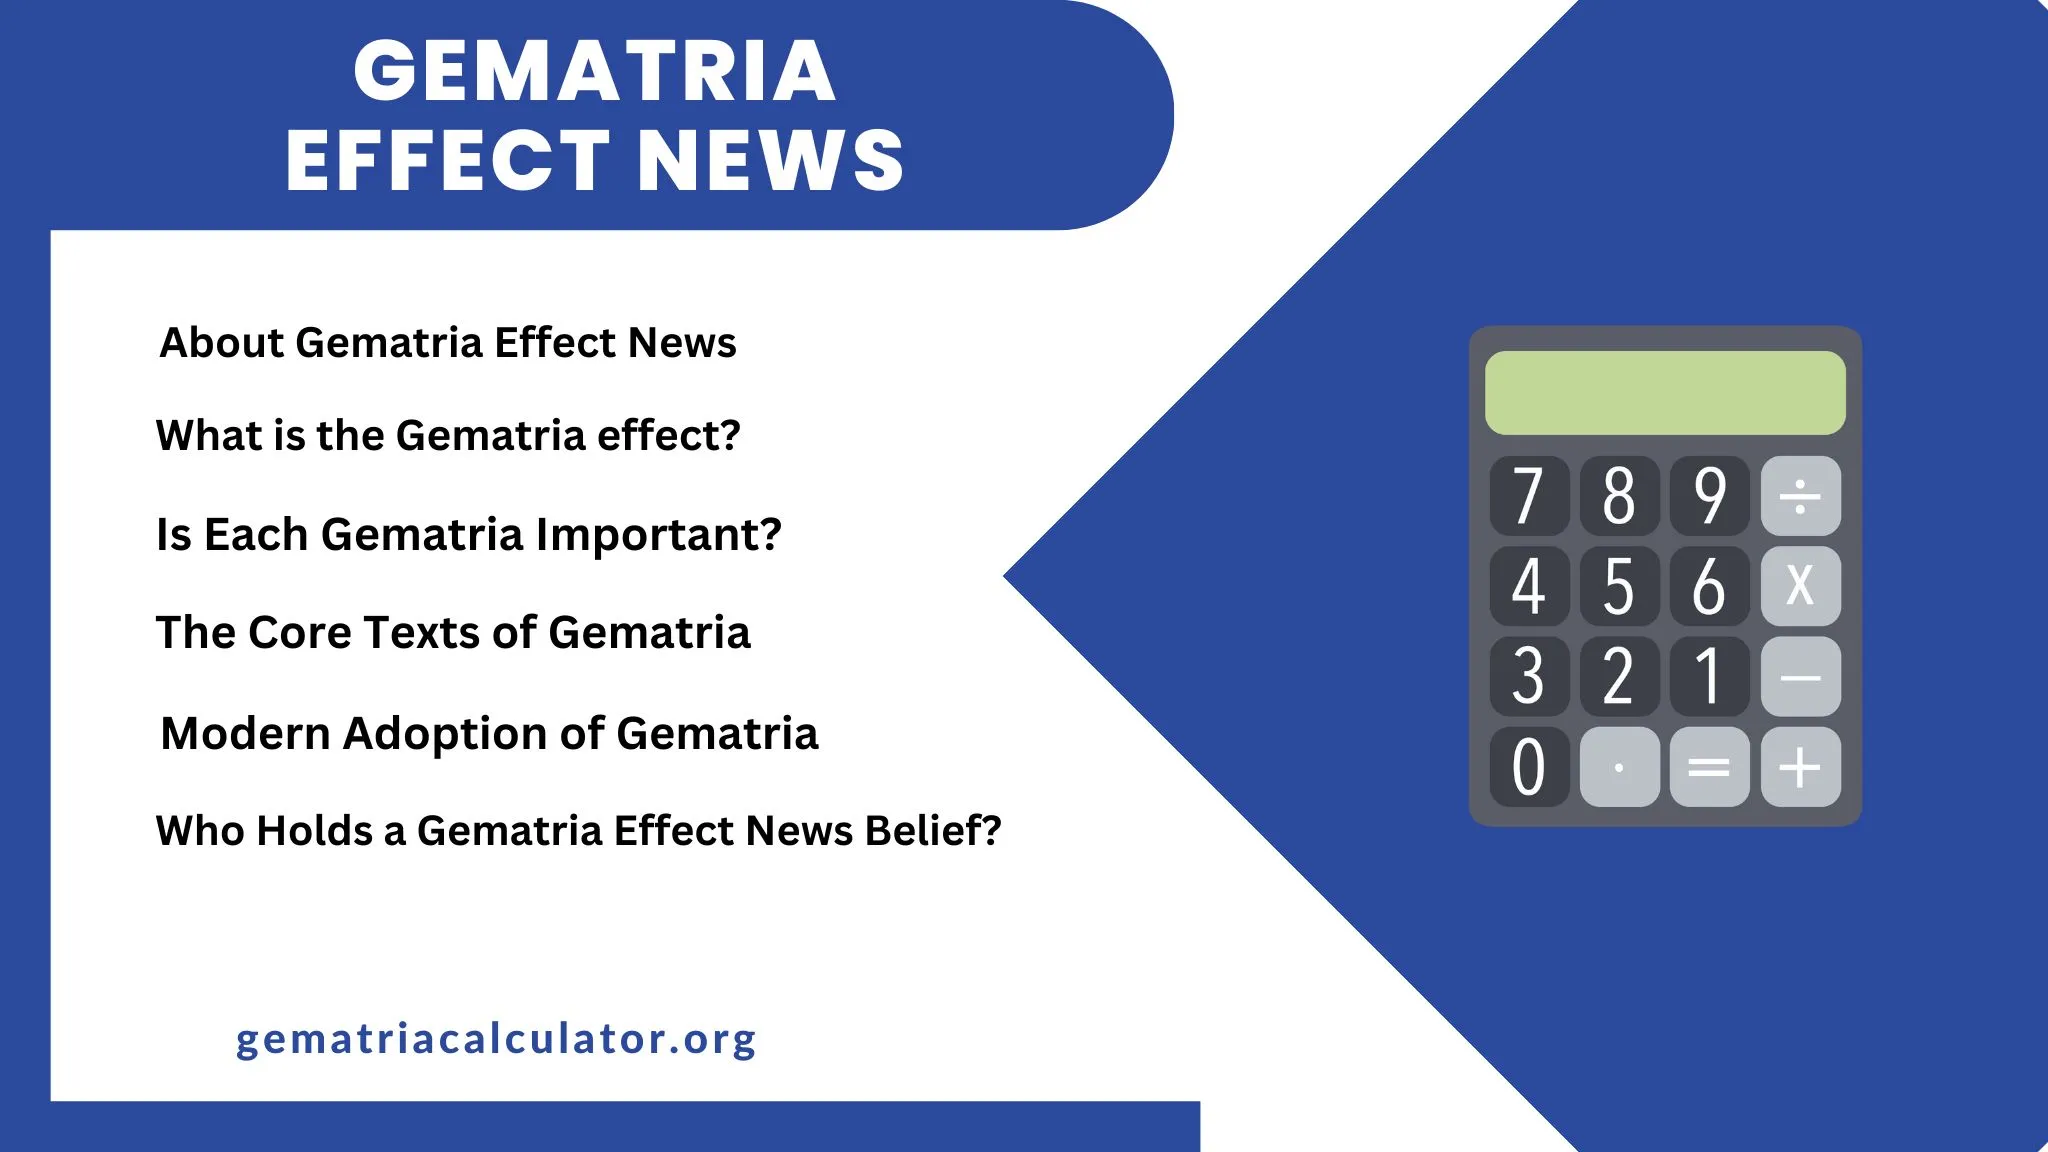 Gematria Effect News What exactly it is